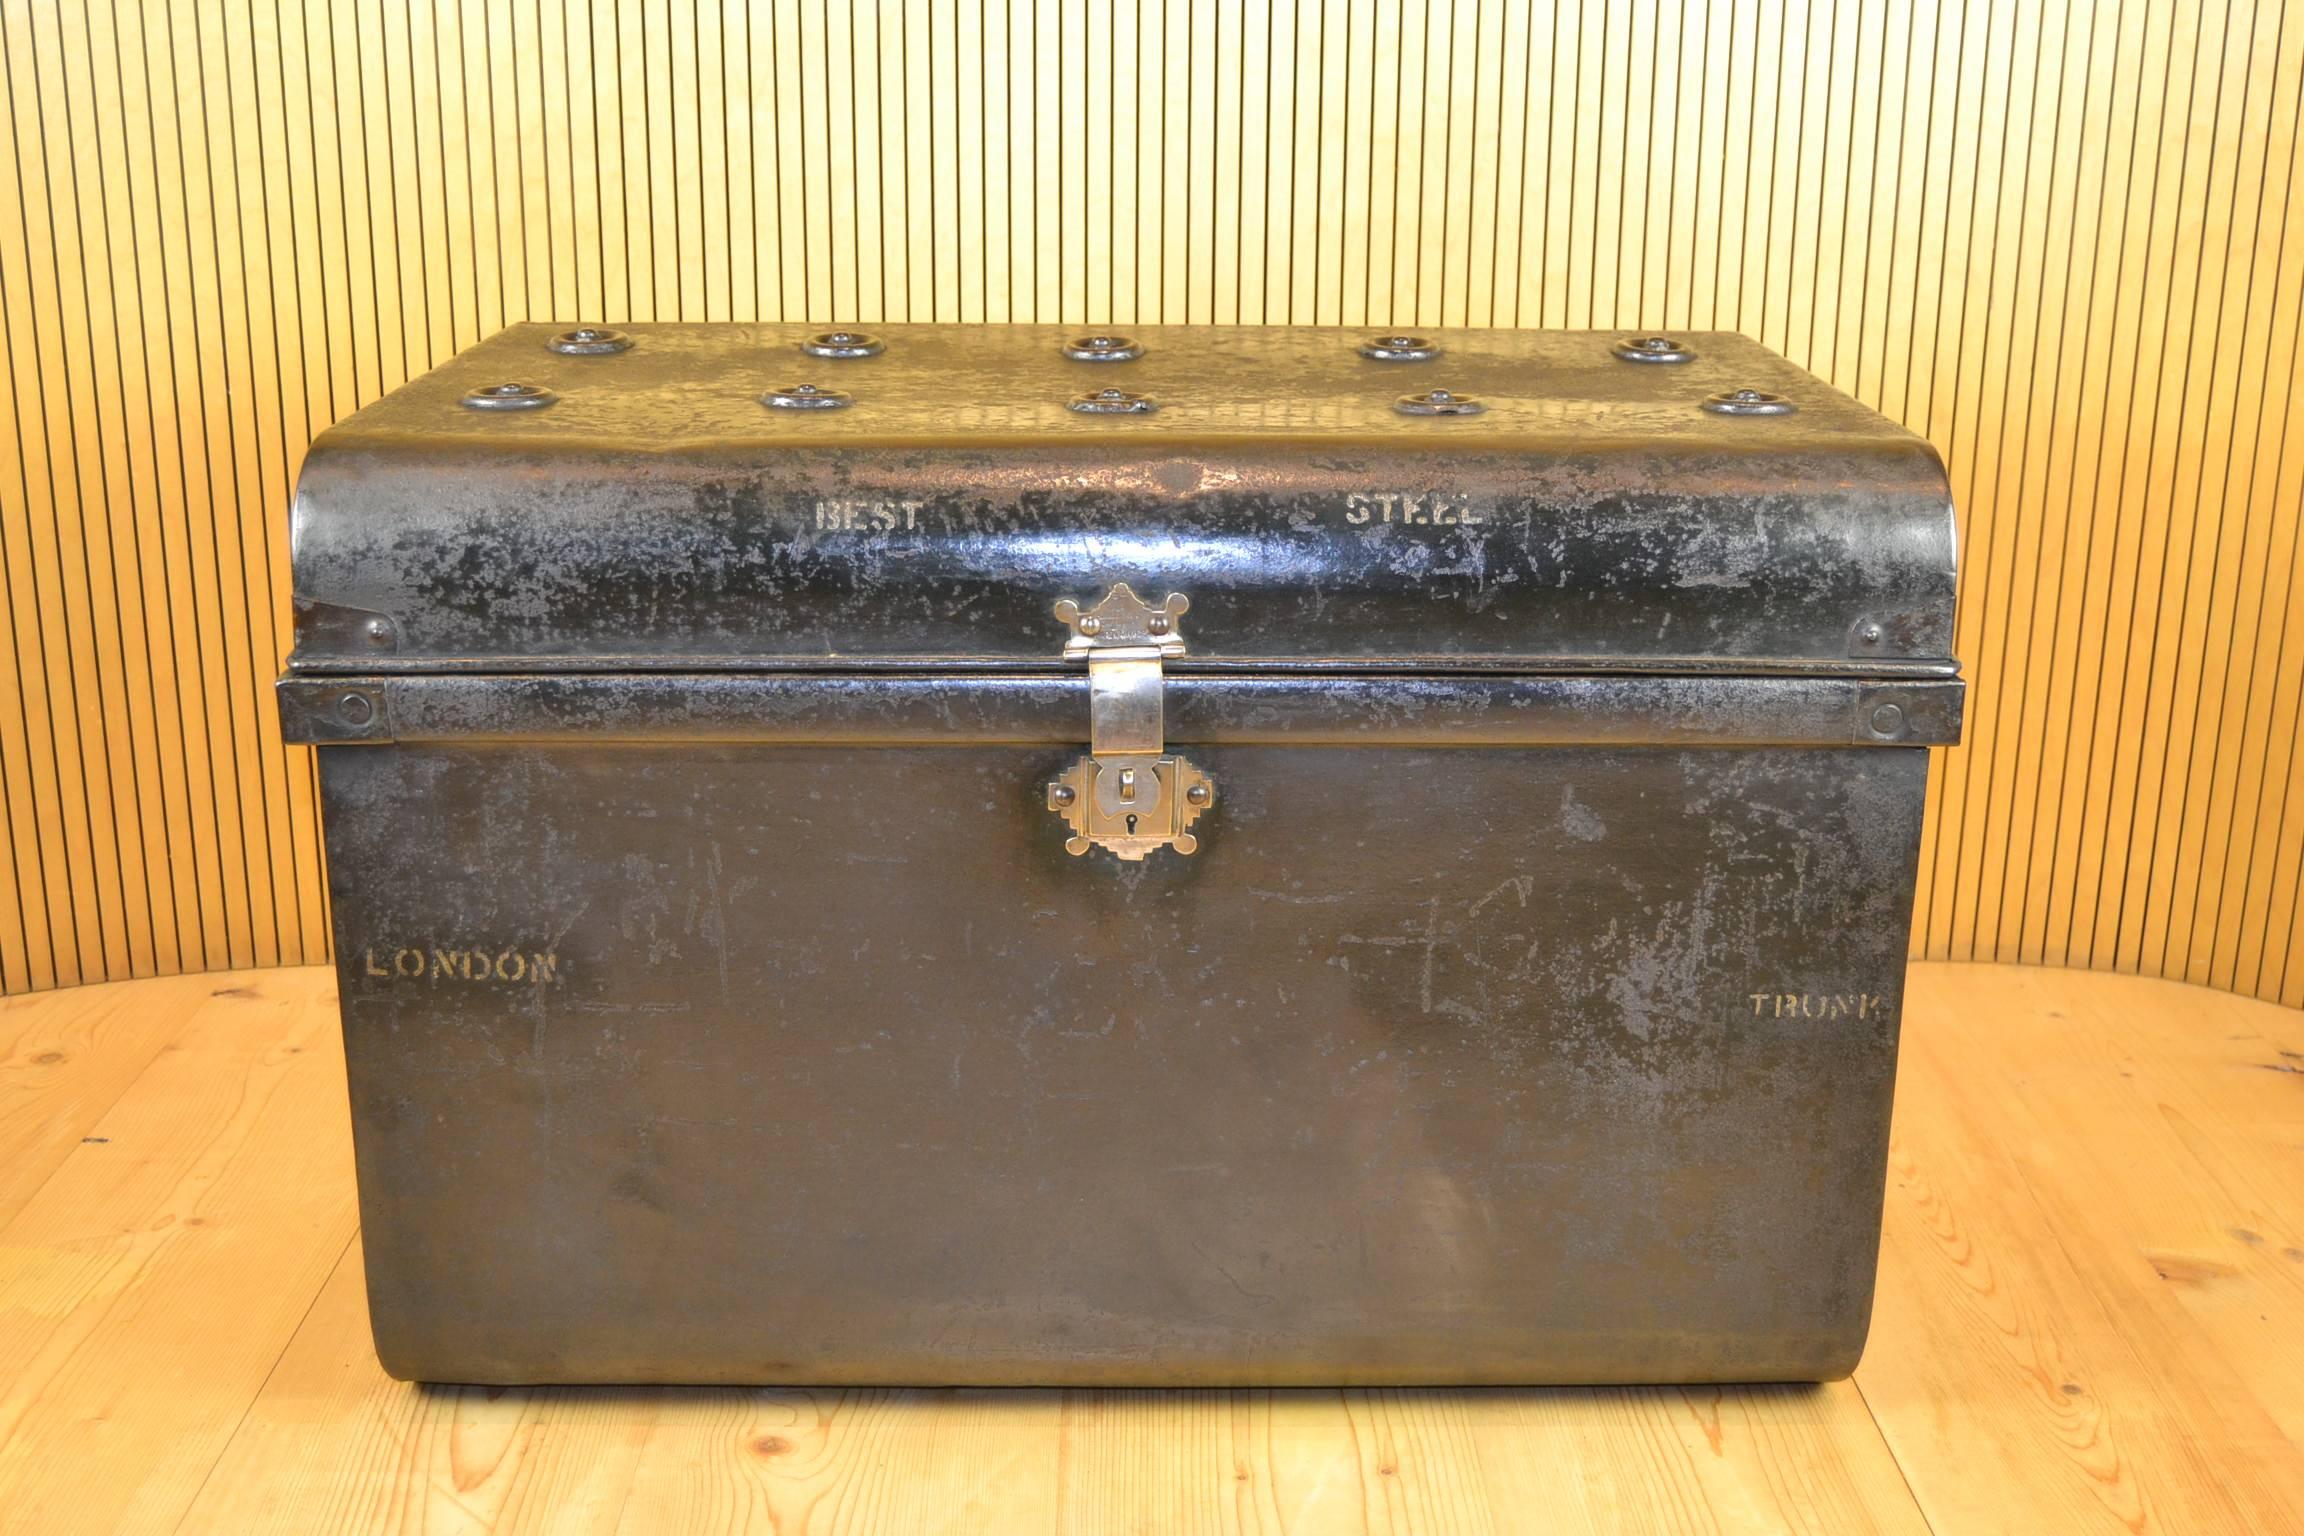 Gorgeous large English antique metal travel trunk, travelling trunk.
Best steel trunk London.
Black painted exterior floor trunk with knobs on the top to protect the trunk when others were stacked on top. Has corner brackets and a steel lock, no